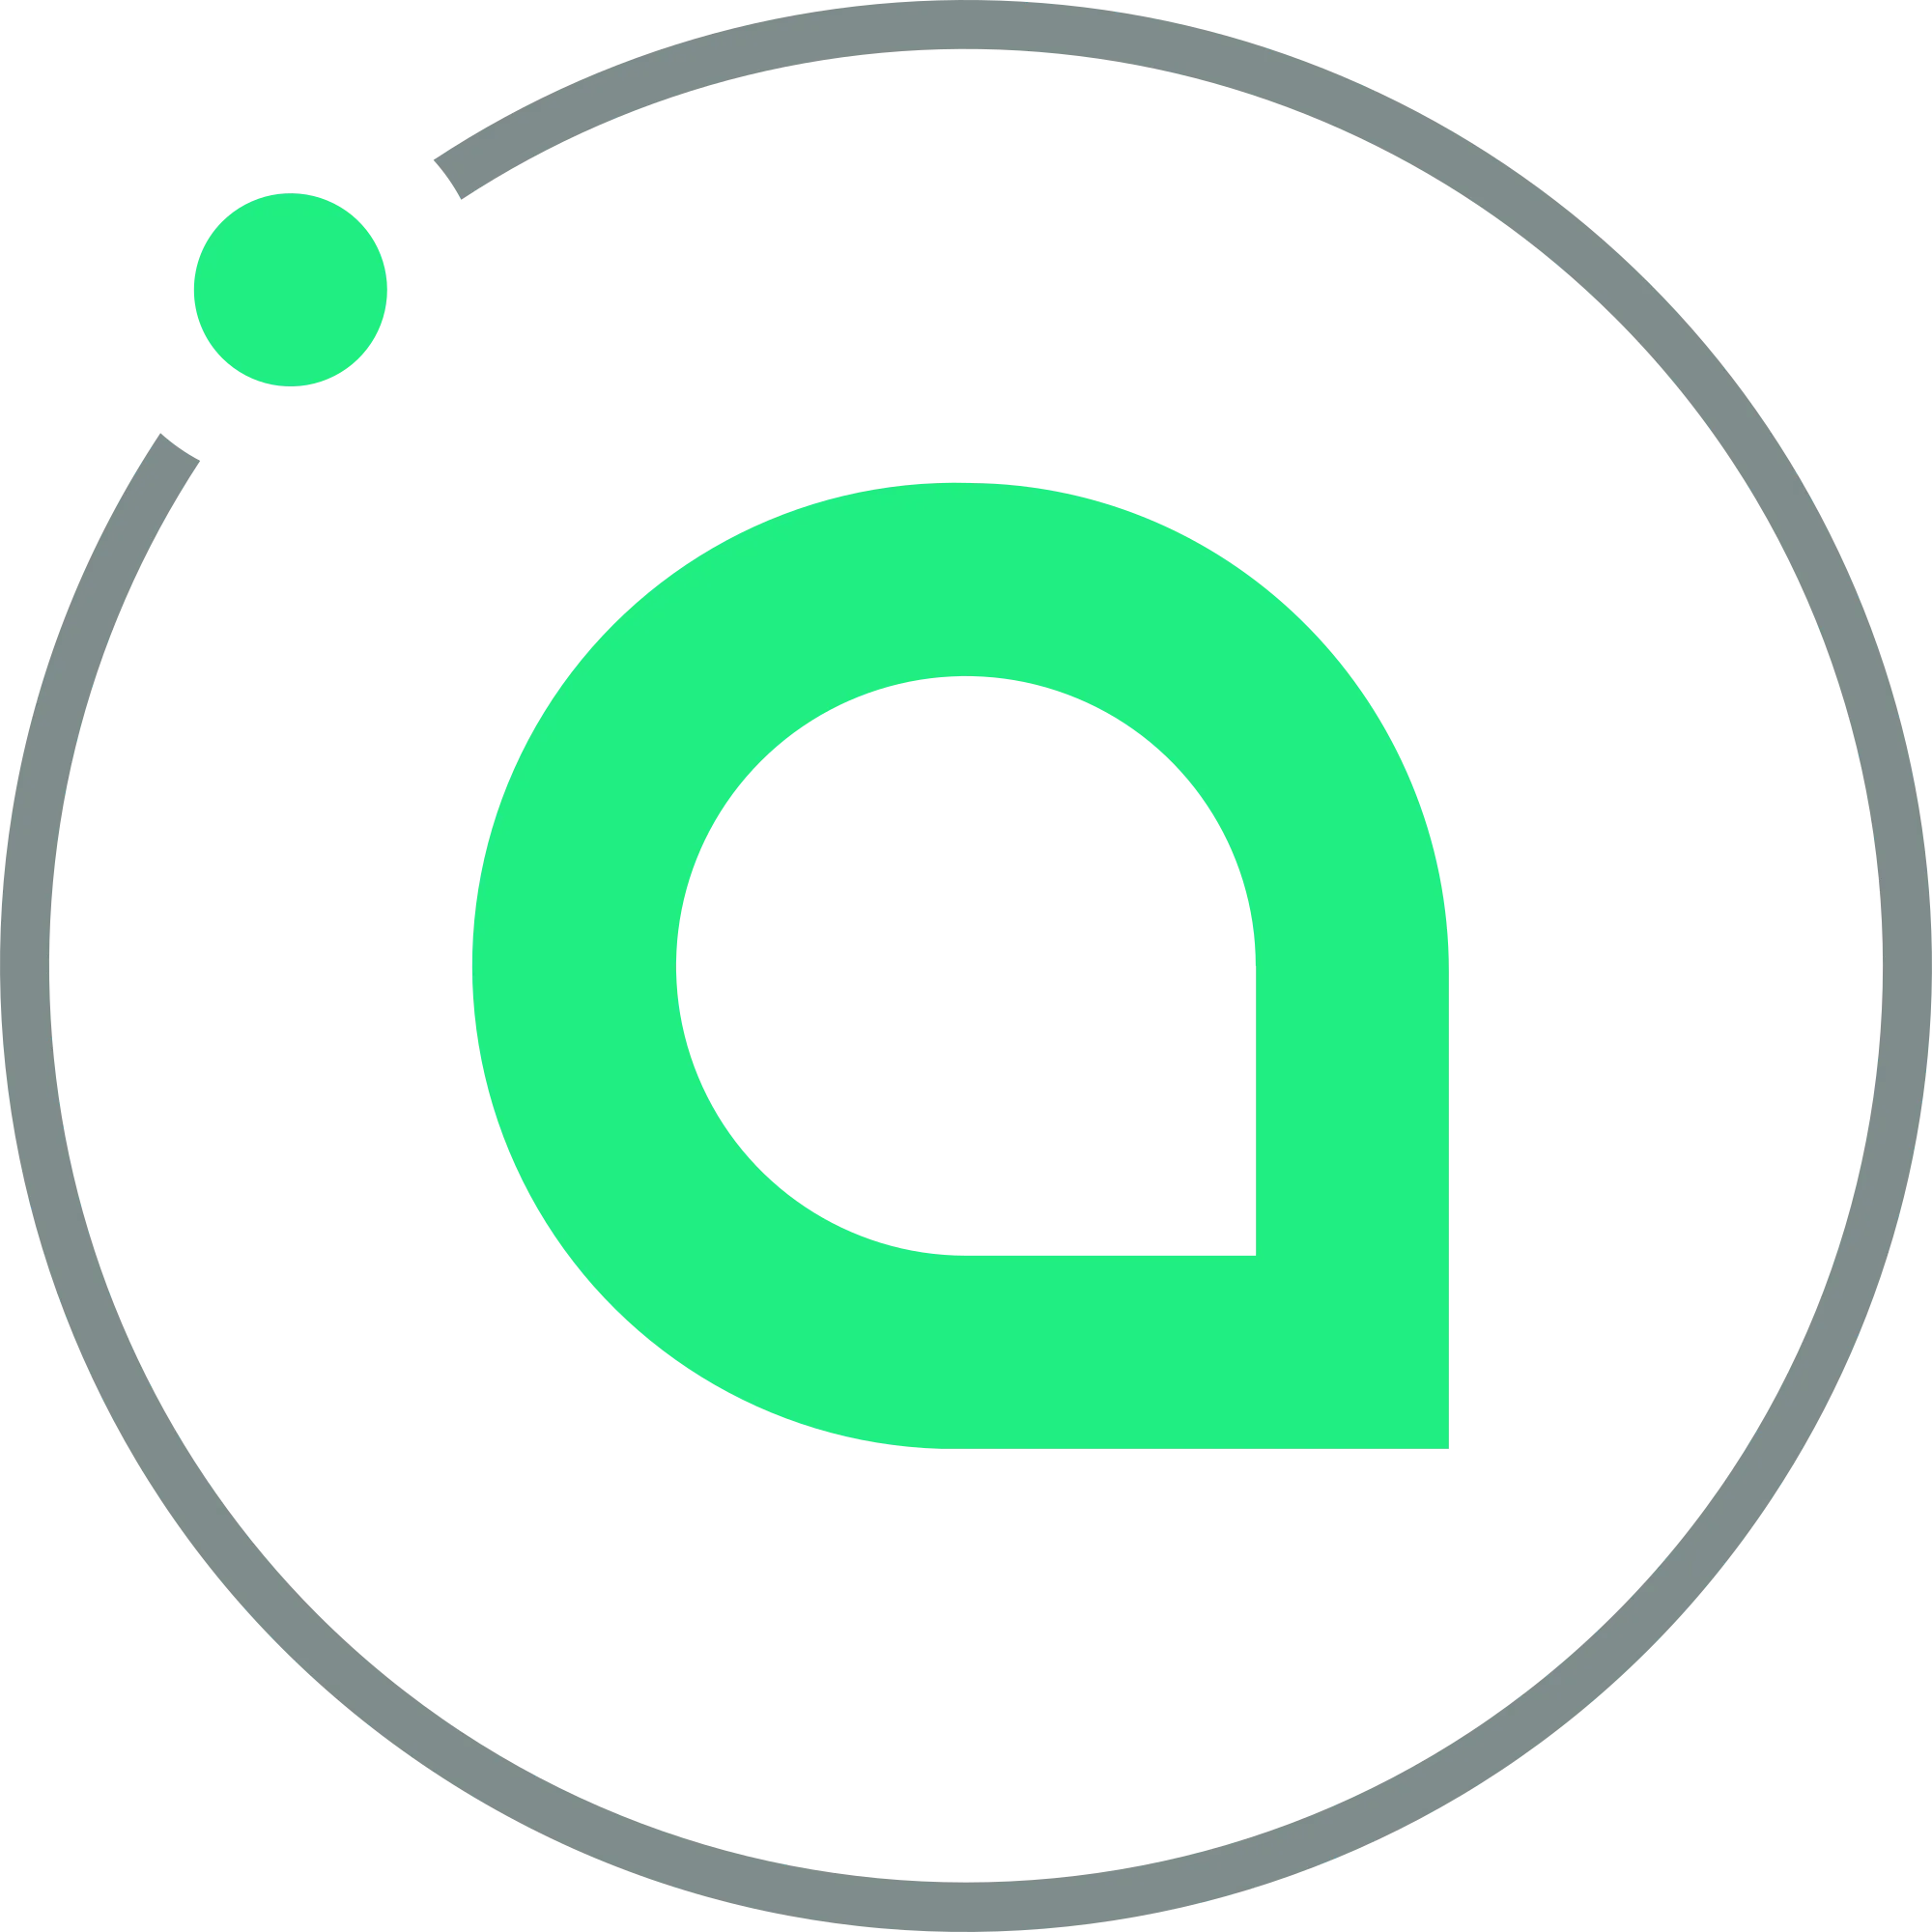 Siacoin logo in png format